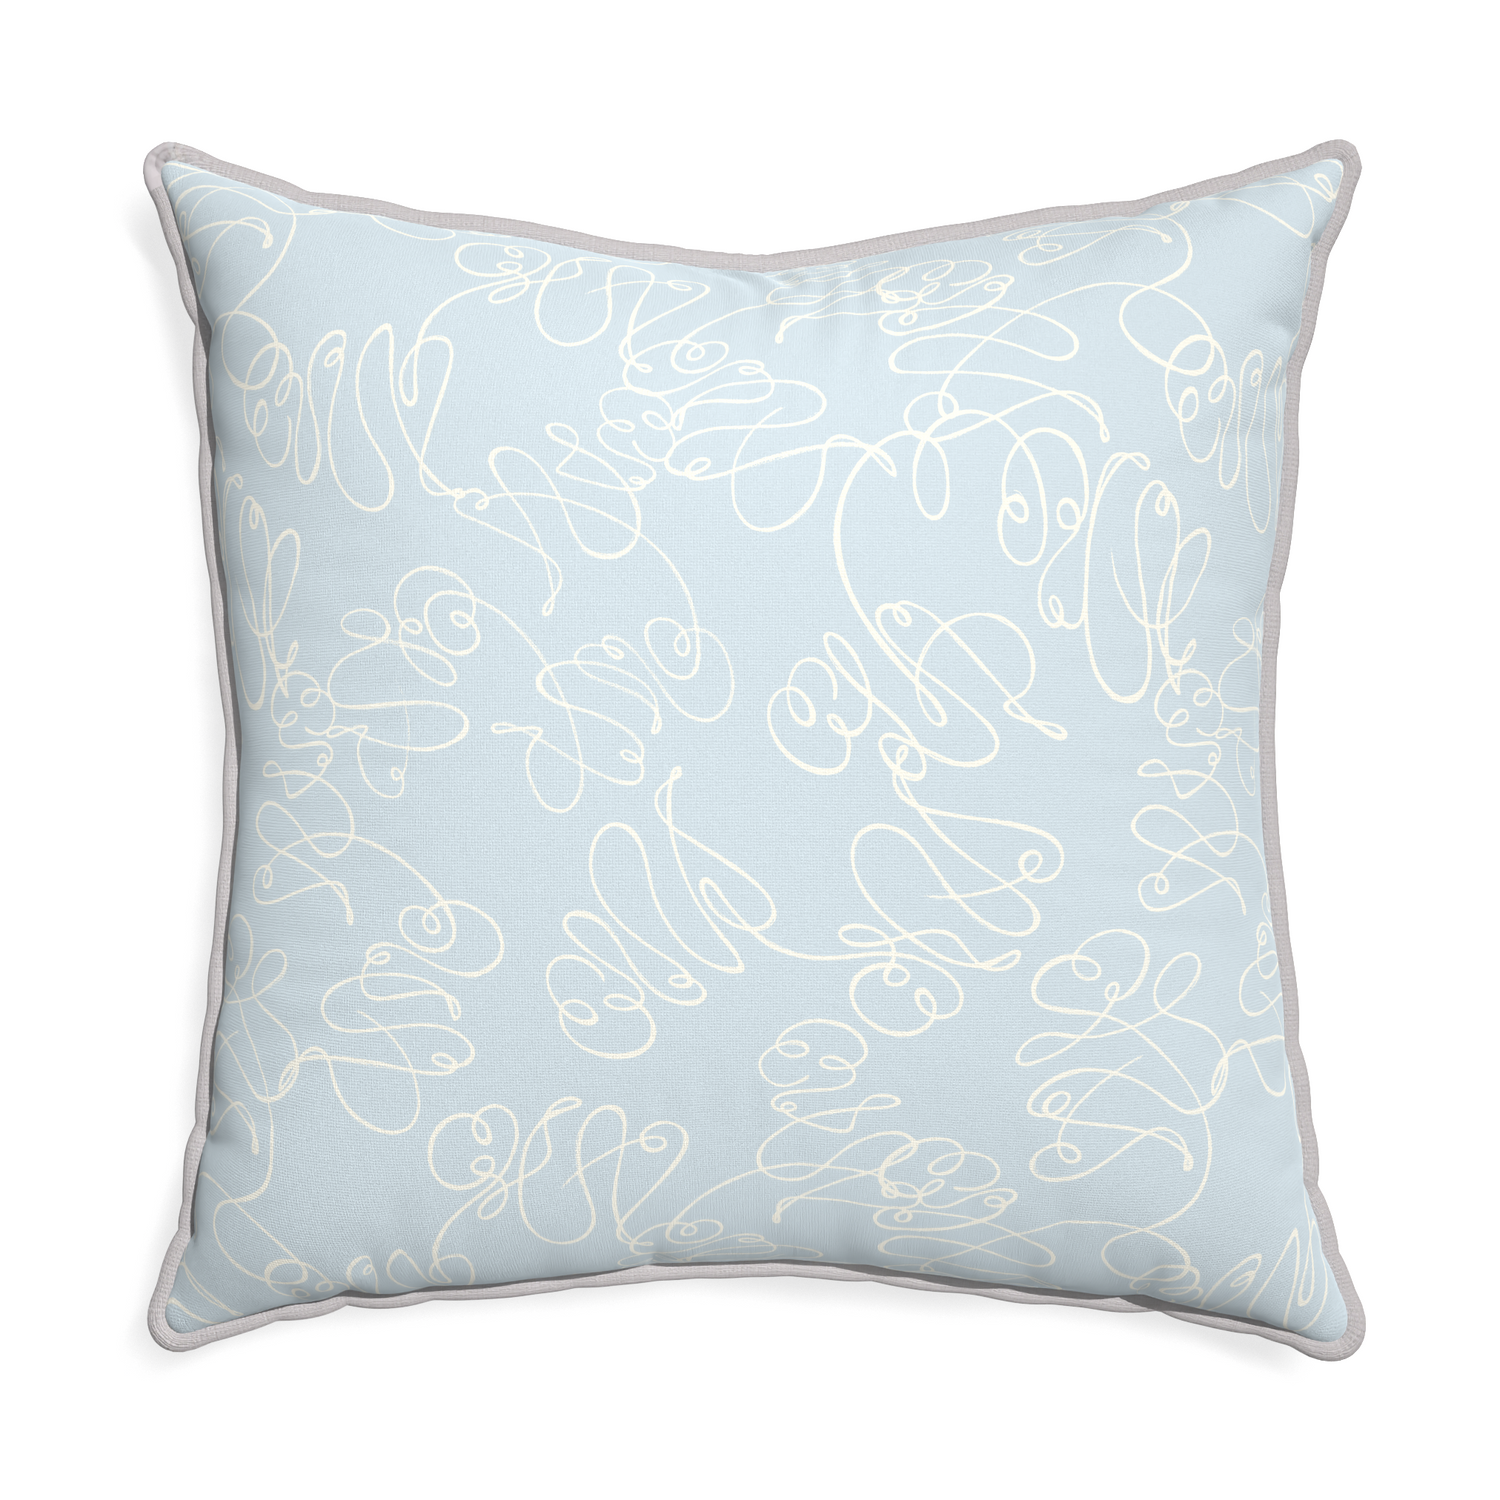 Euro-sham mirabella custom pillow with pebble piping on white background